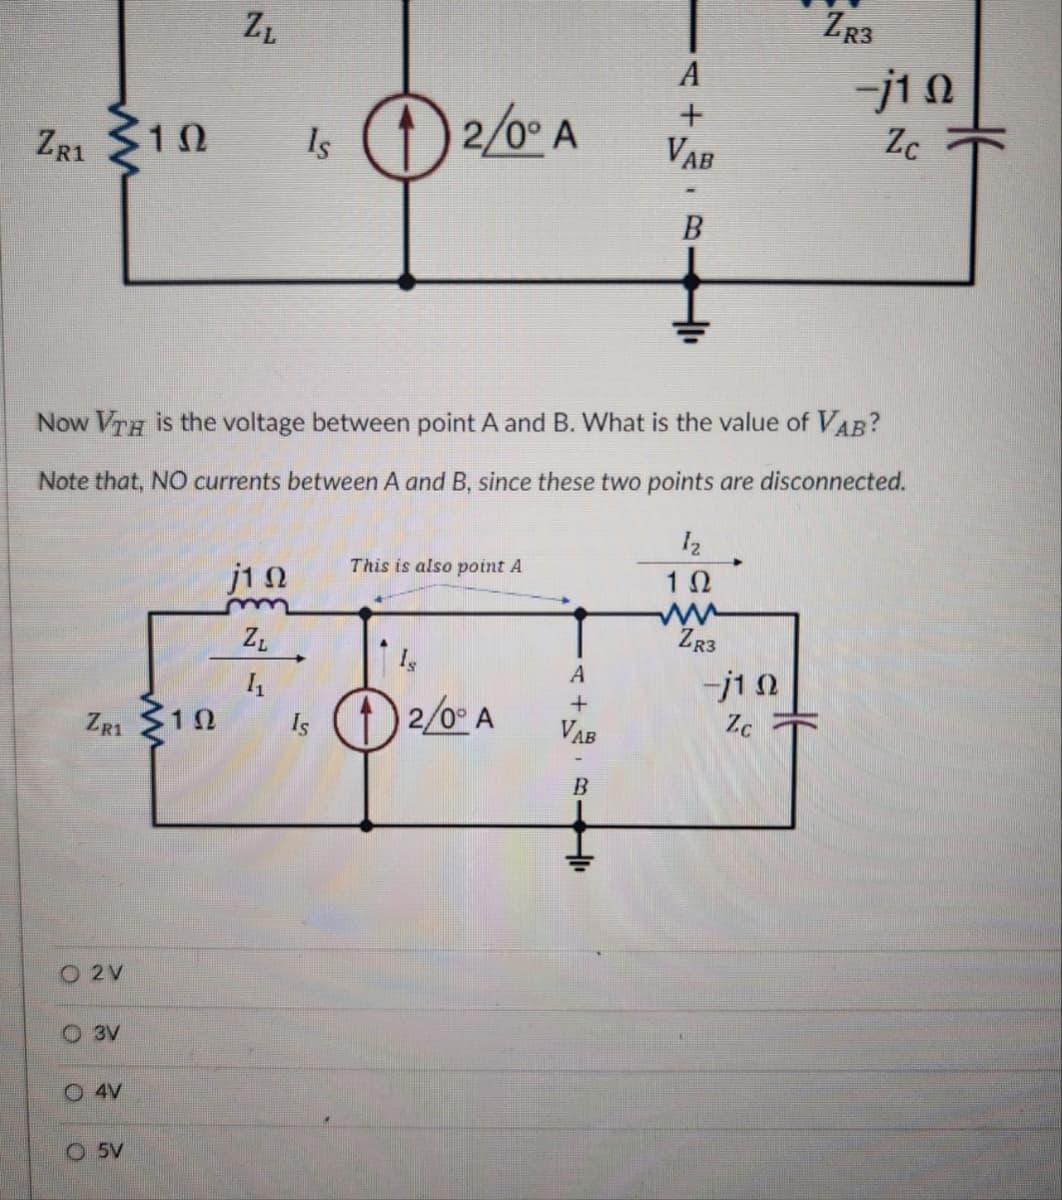 ZR3
ZL
A
ZR1
10
Is 2/0° A
+
-j10
Zc
Vab
B
Now VTH is the voltage between point A and B. What is the value of VAB?
Note that, NO currents between A and B, since these two points are disconnected.
This is also point A
j10
1 Ω
m
ww
ZR3
ZL
Is
A
11
-j10
ZR1
1Ω
Is
2/0° A
+
VAB
Zc
B
O 2V
3V
4V
O5V